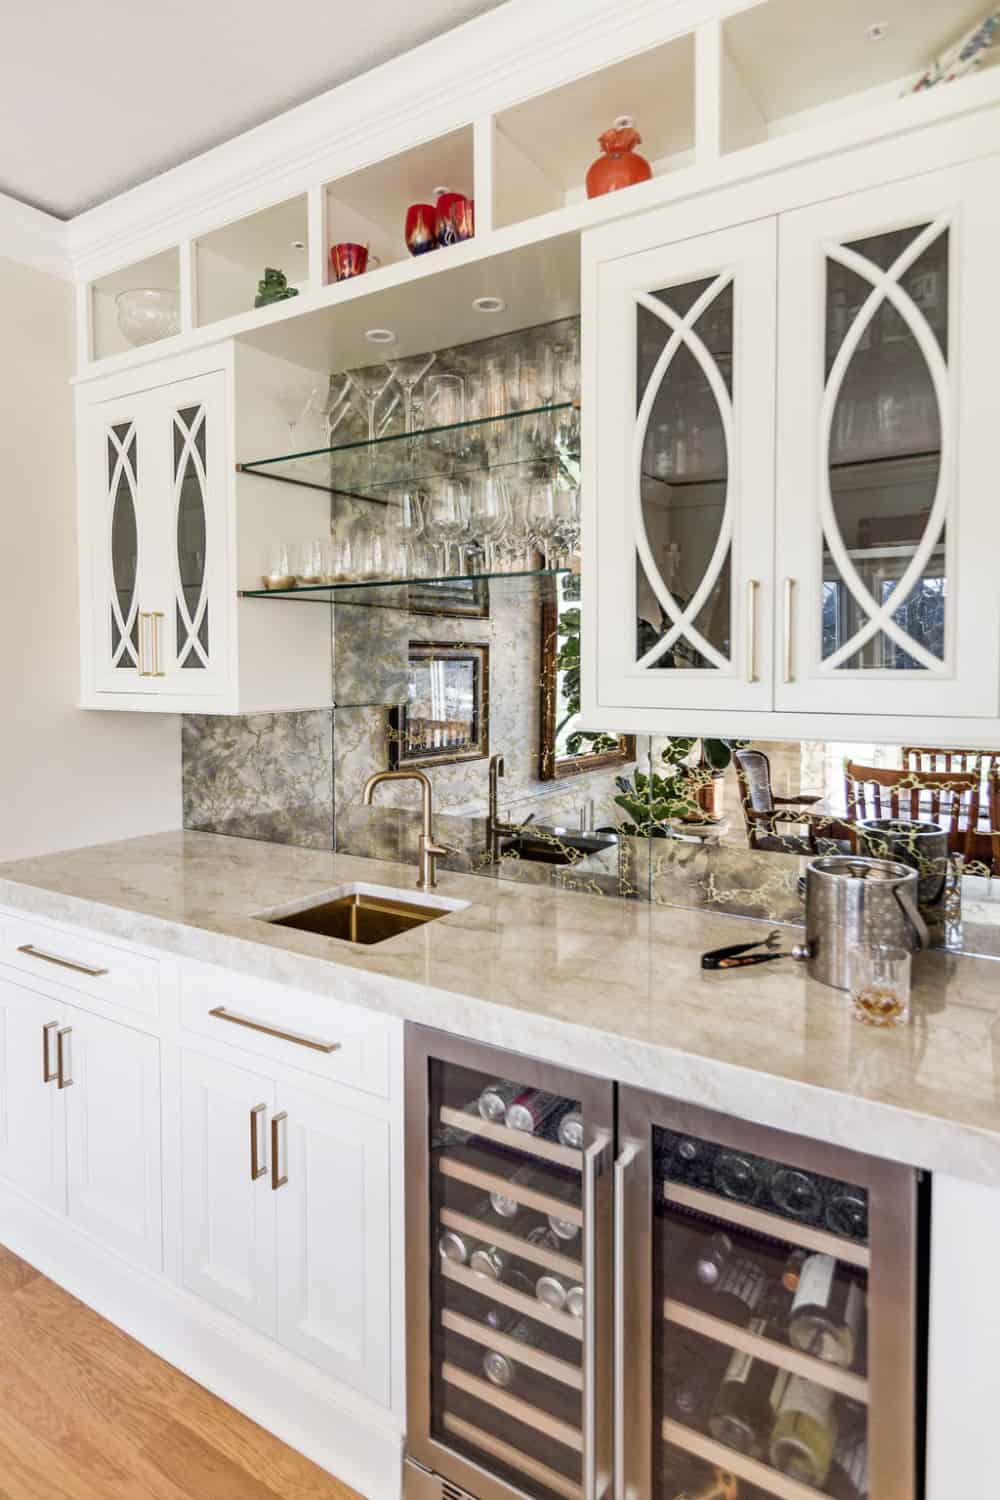 Nicholas Design Build | Remodel a kitchen with white cabinets and a wine cooler.